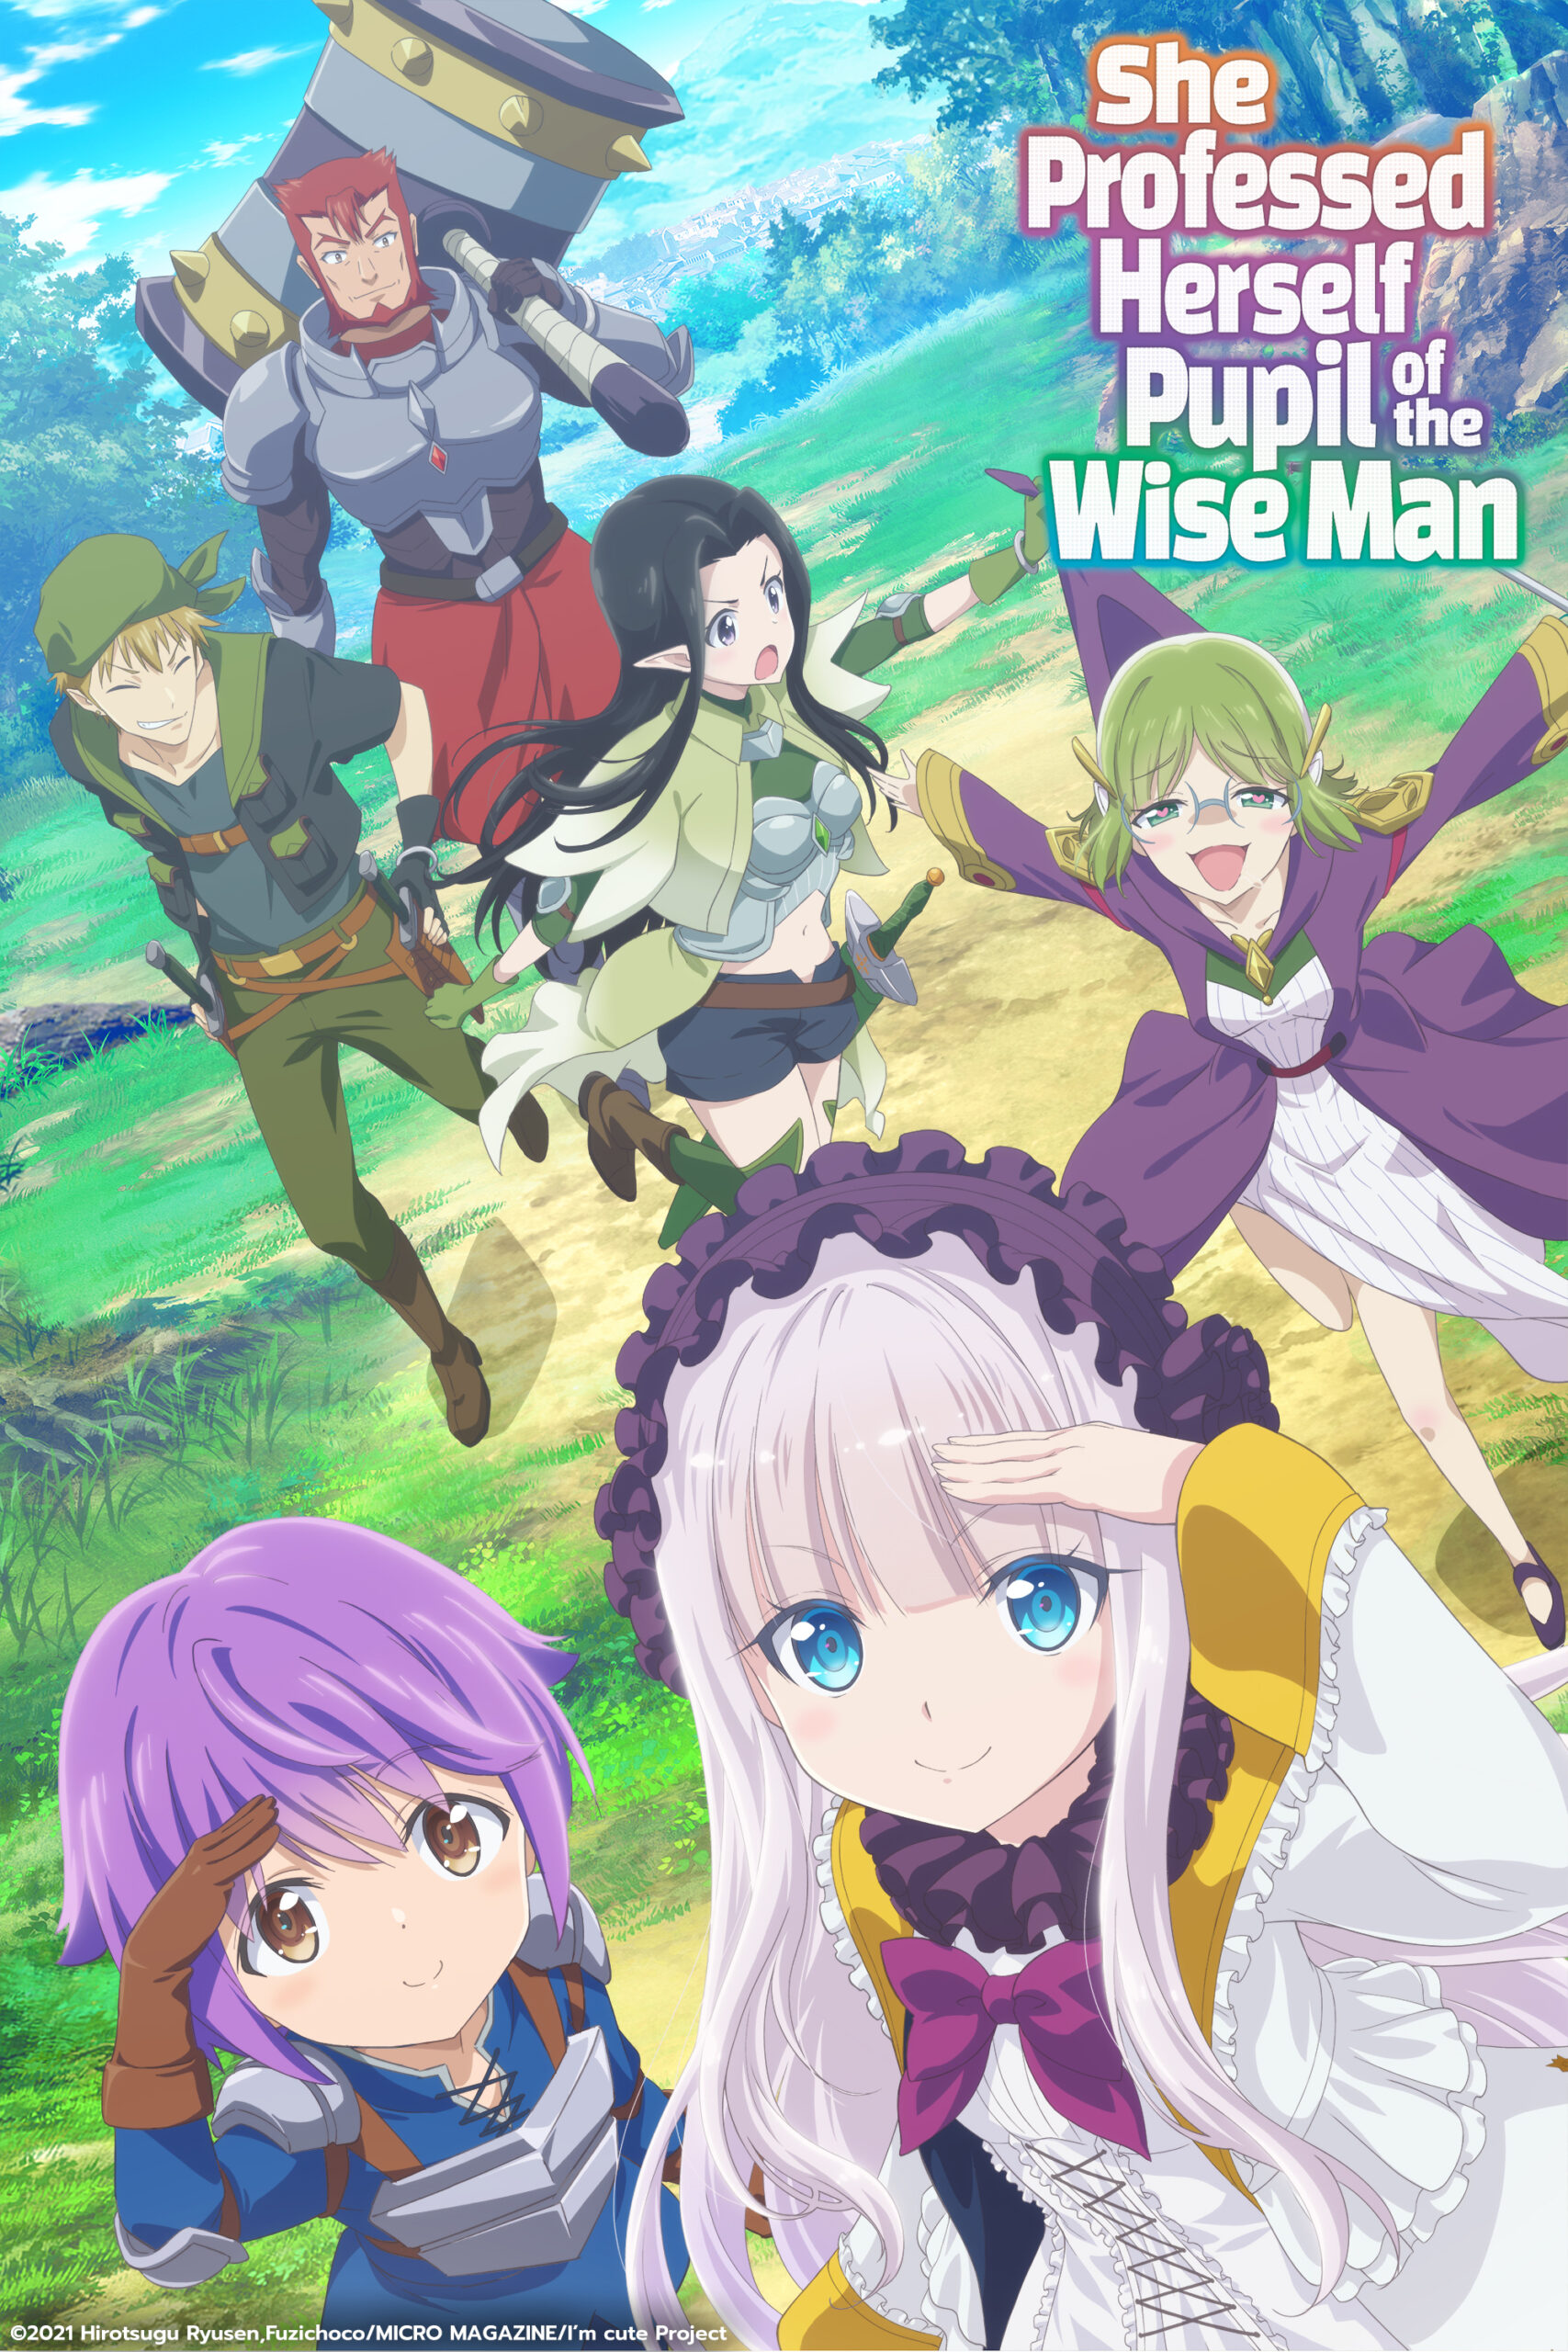 She Professed Herself Pupil of the Wise Man anime key visual